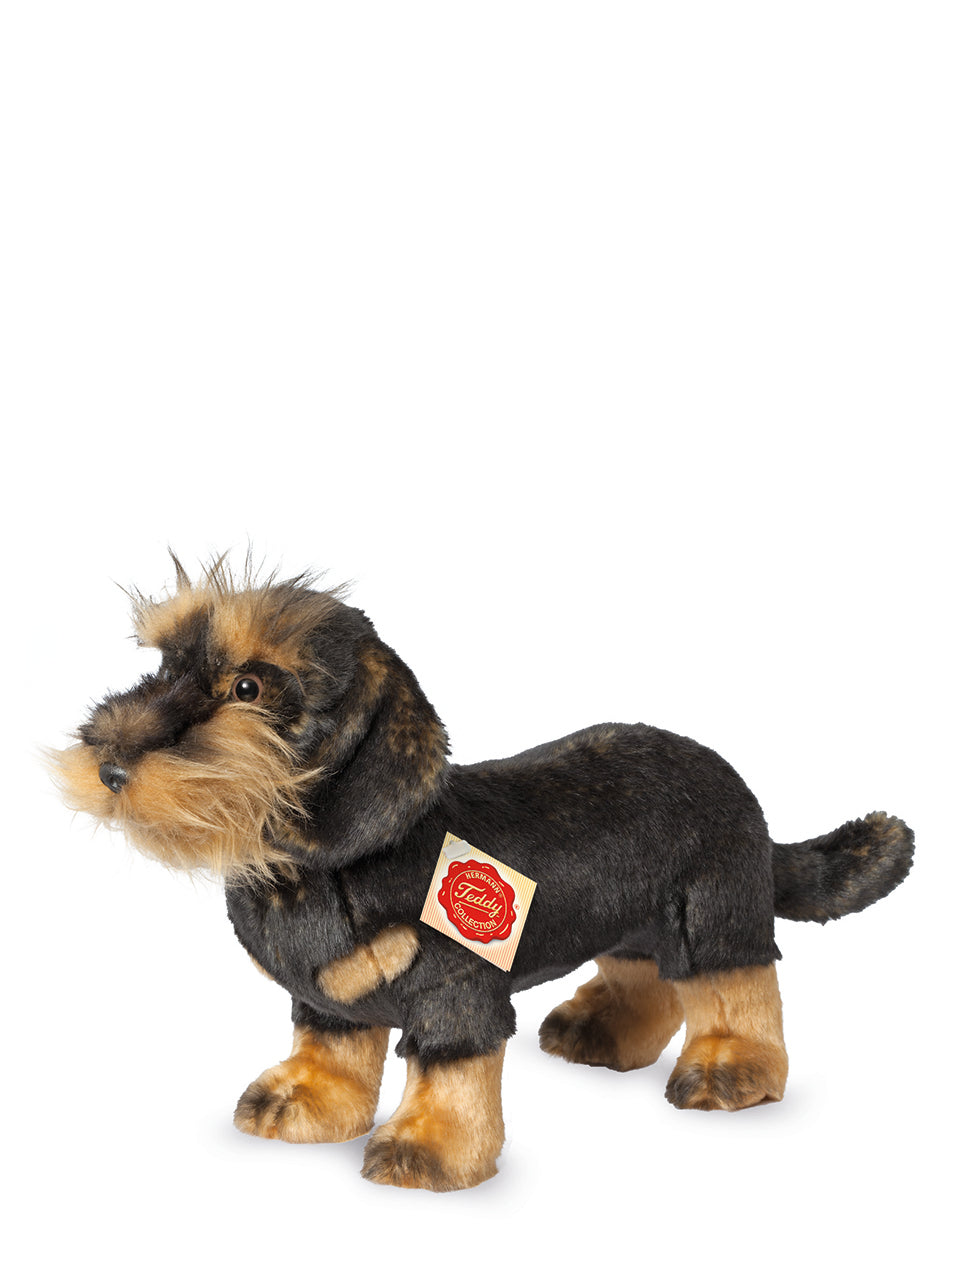 Standing Rough-haired Dachshund (28 cm), soft toy